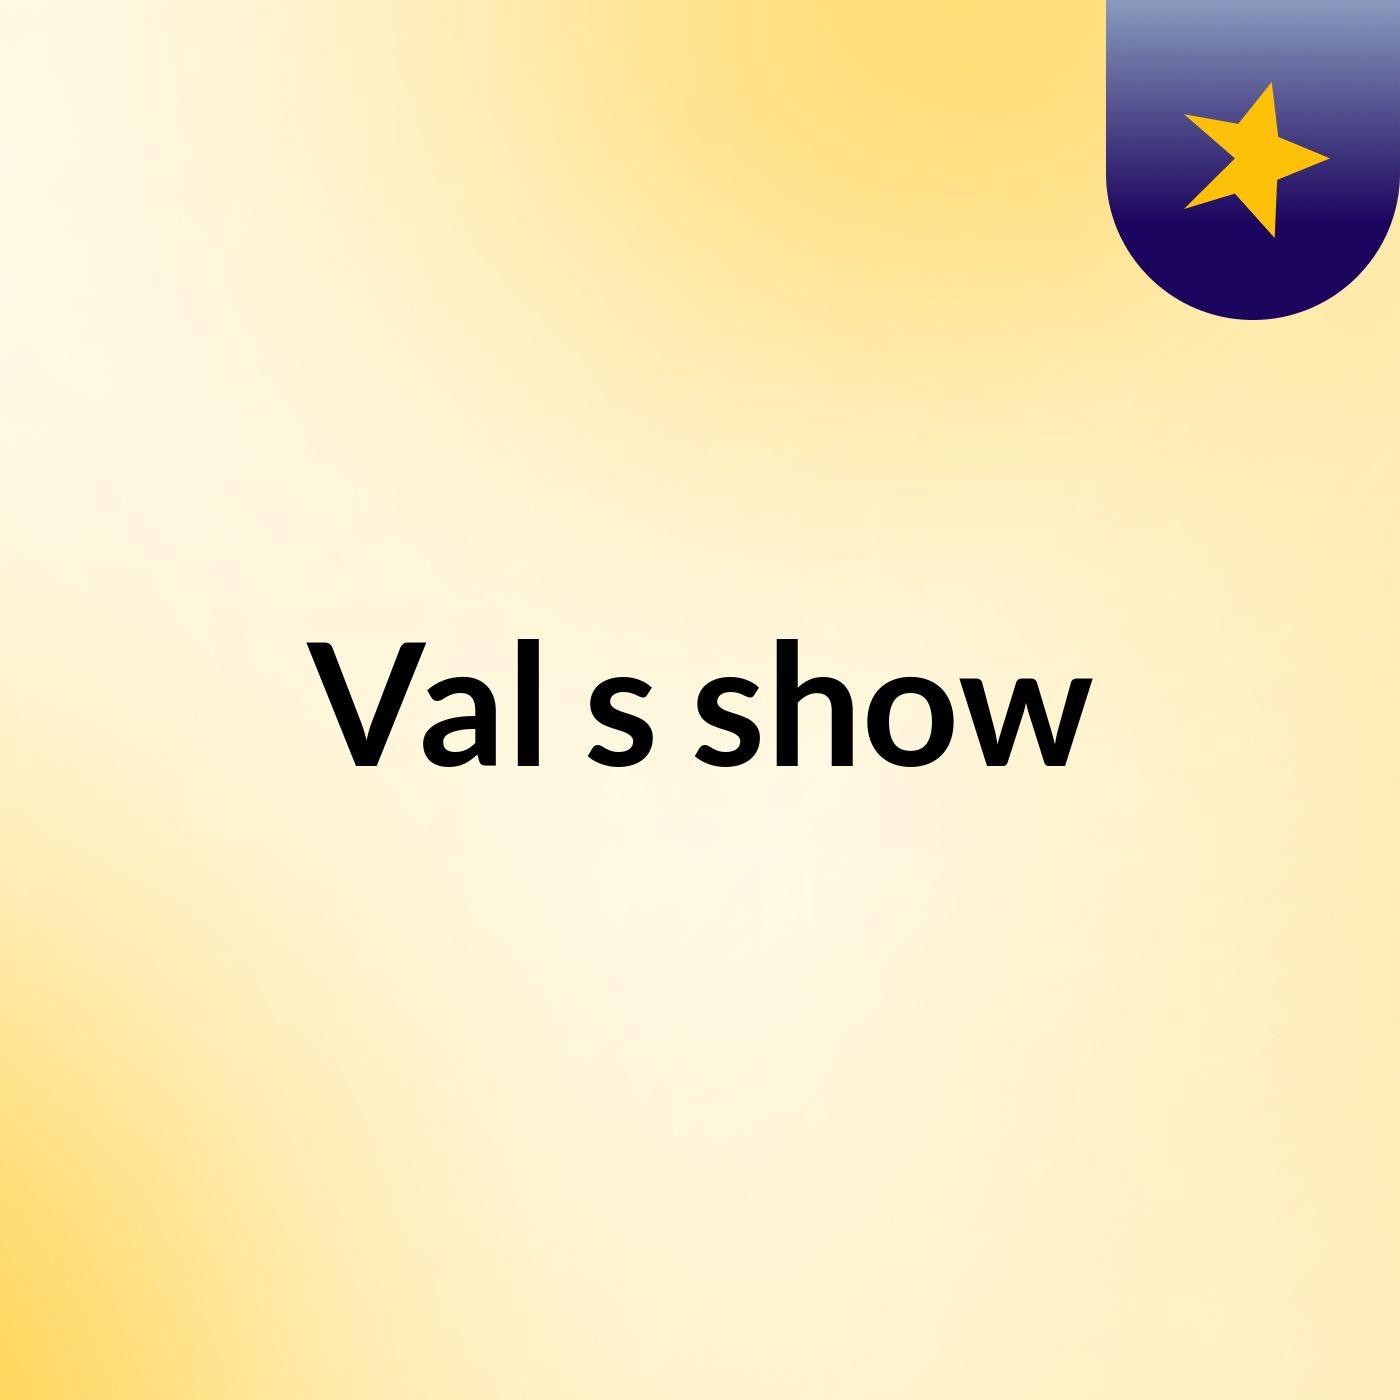 Val's show